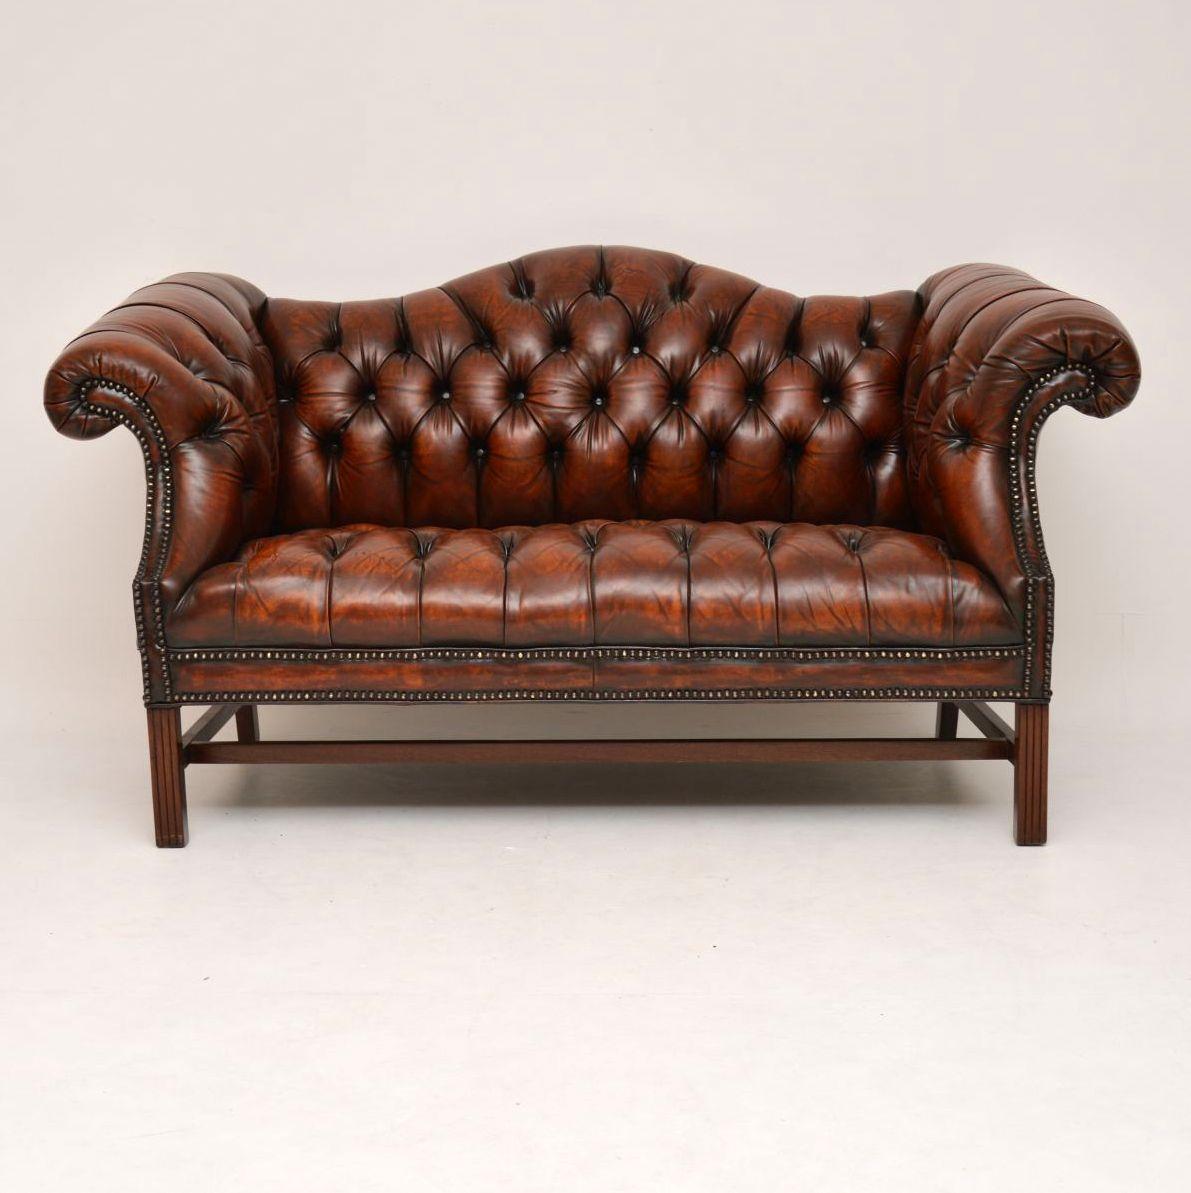 This antique sofa still has the original deep buttoned leather upholstery, which is in very good original condition. The color is magnificent & it has loads of character. We have just had it revived & polished by our leather specialist. Its